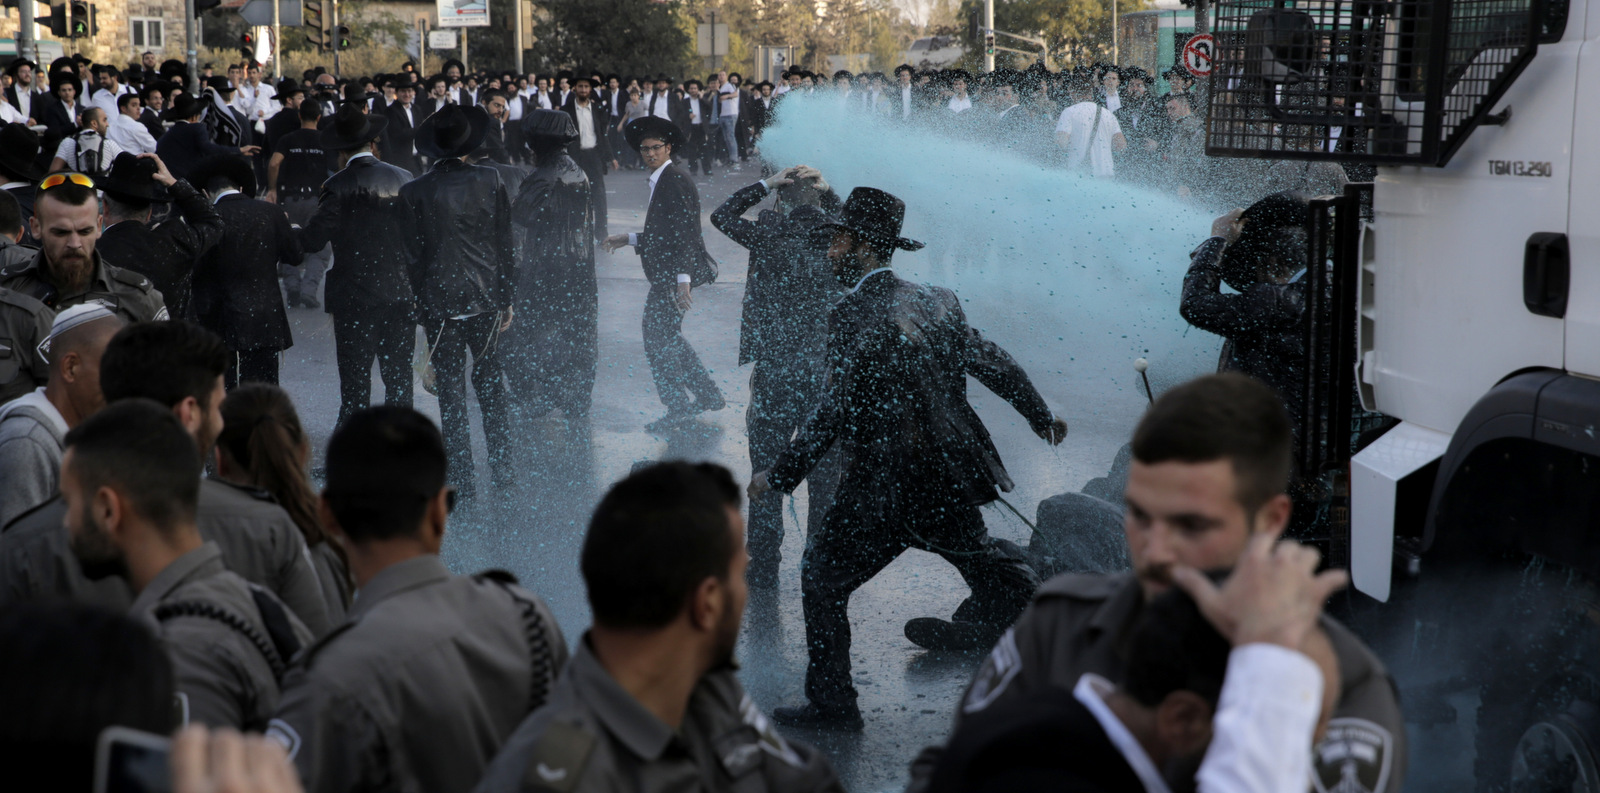 Israeli police officers spray colored water towards ultra Orthodox Jewish men during a protest against their enlistment in the army at the entrance to Jerusalem, Oct. 23, 2017. (AP/Sebastian Scheiner)